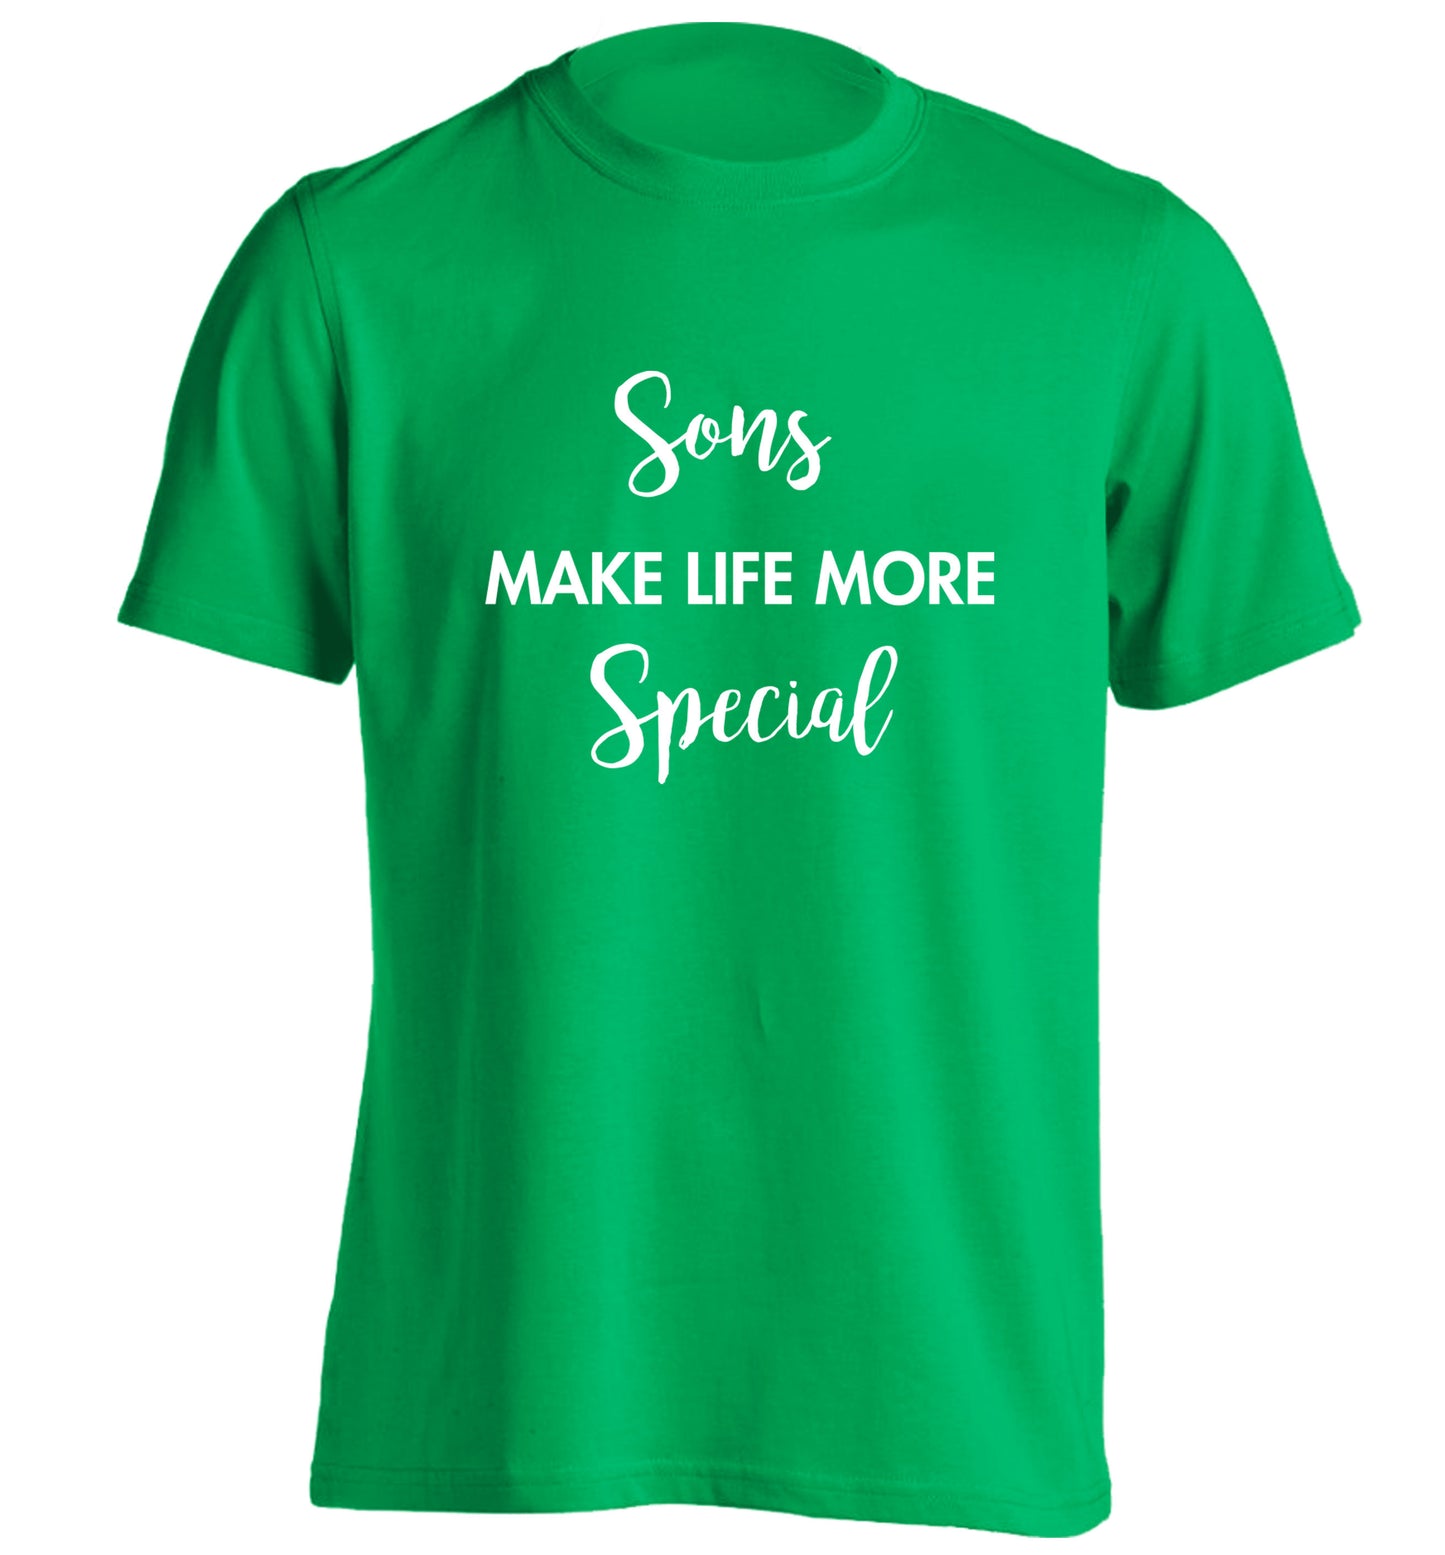 Sons make life more special adults unisex green Tshirt 2XL